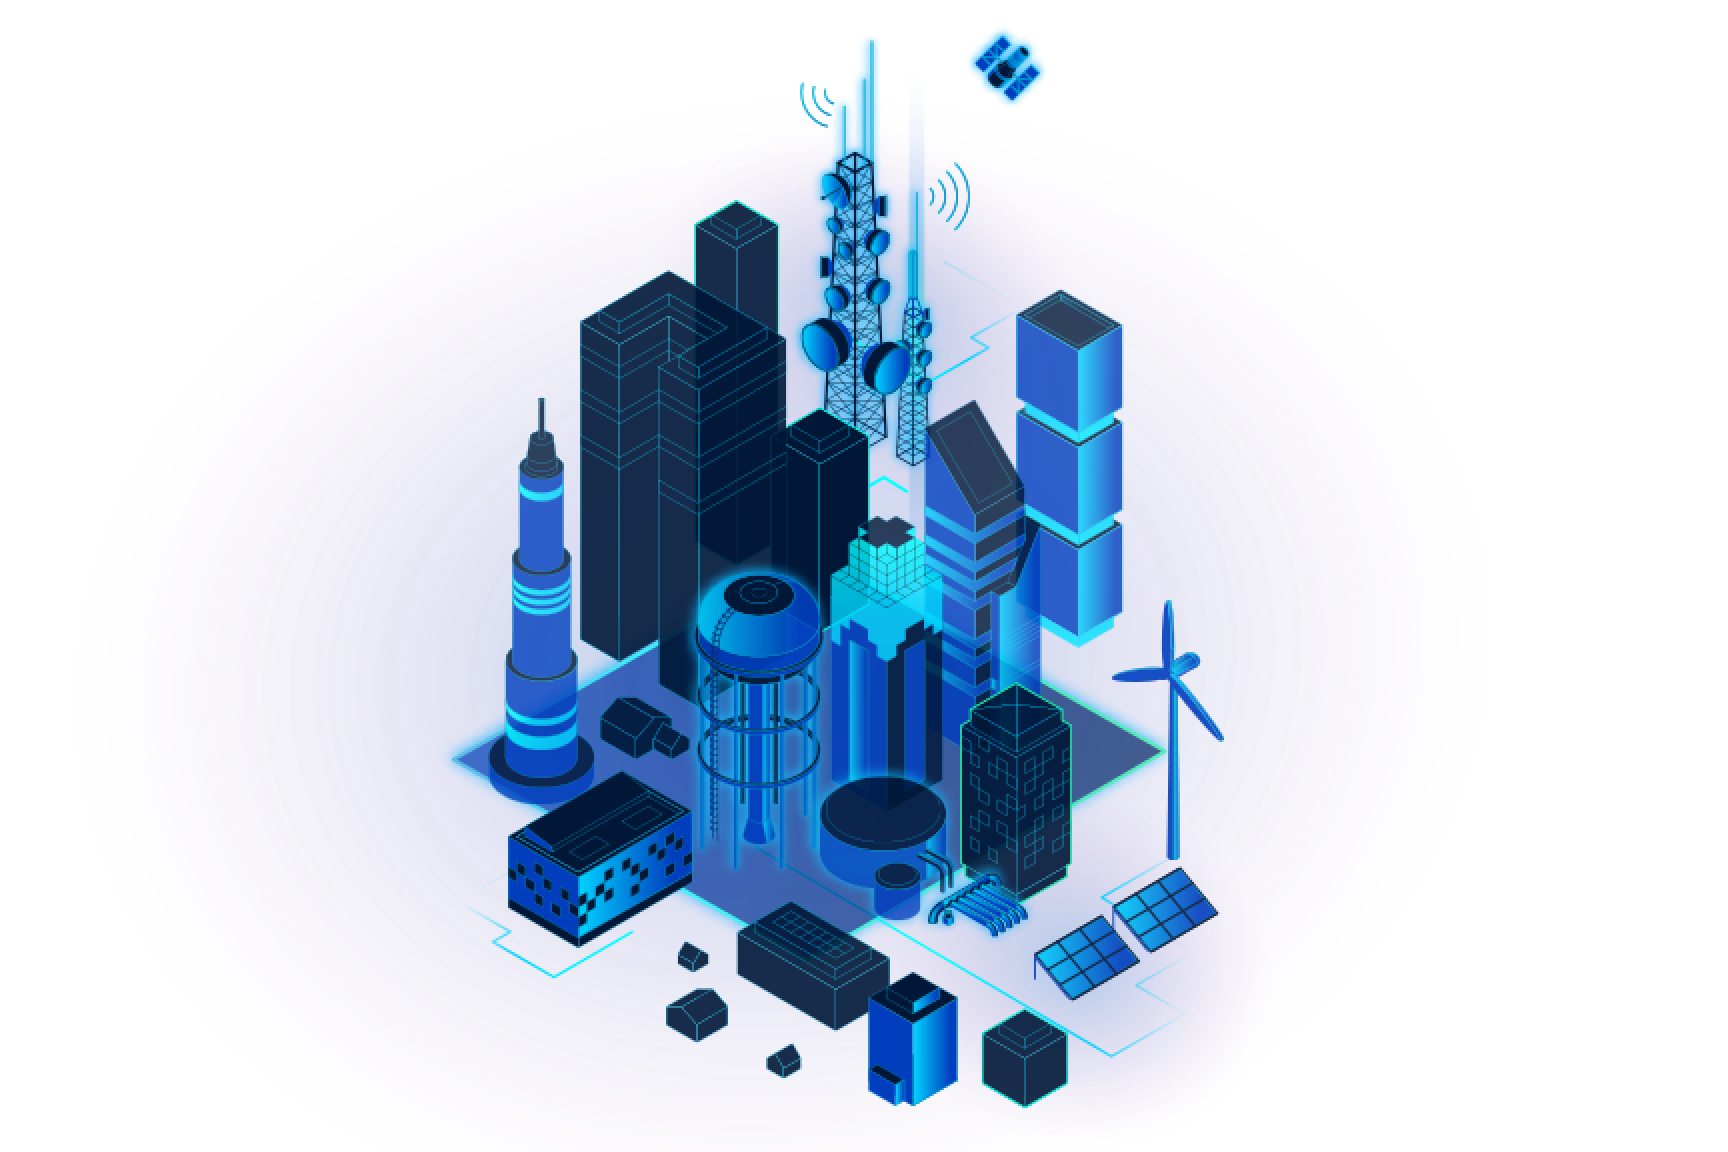 Graphic rendering of city infrastructure such as a wind turbine, skyscraper, and radio tower in shades of blue